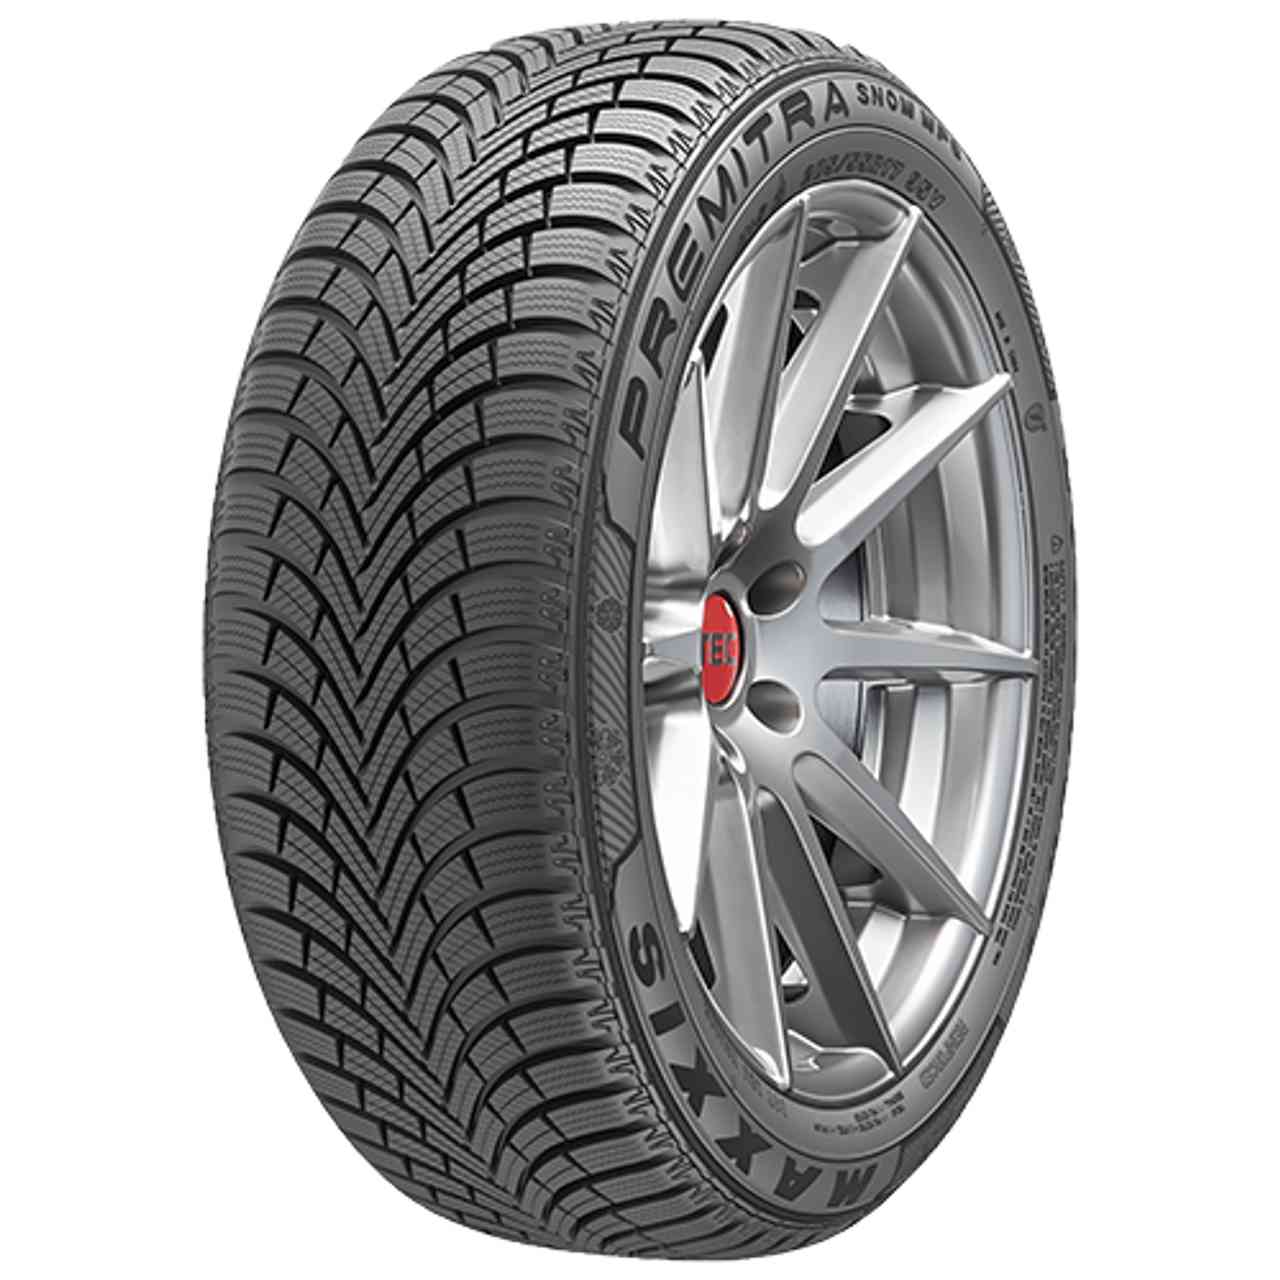 MAXXIS PREMITRA SNOW WP6 205/55R16 91H BSW